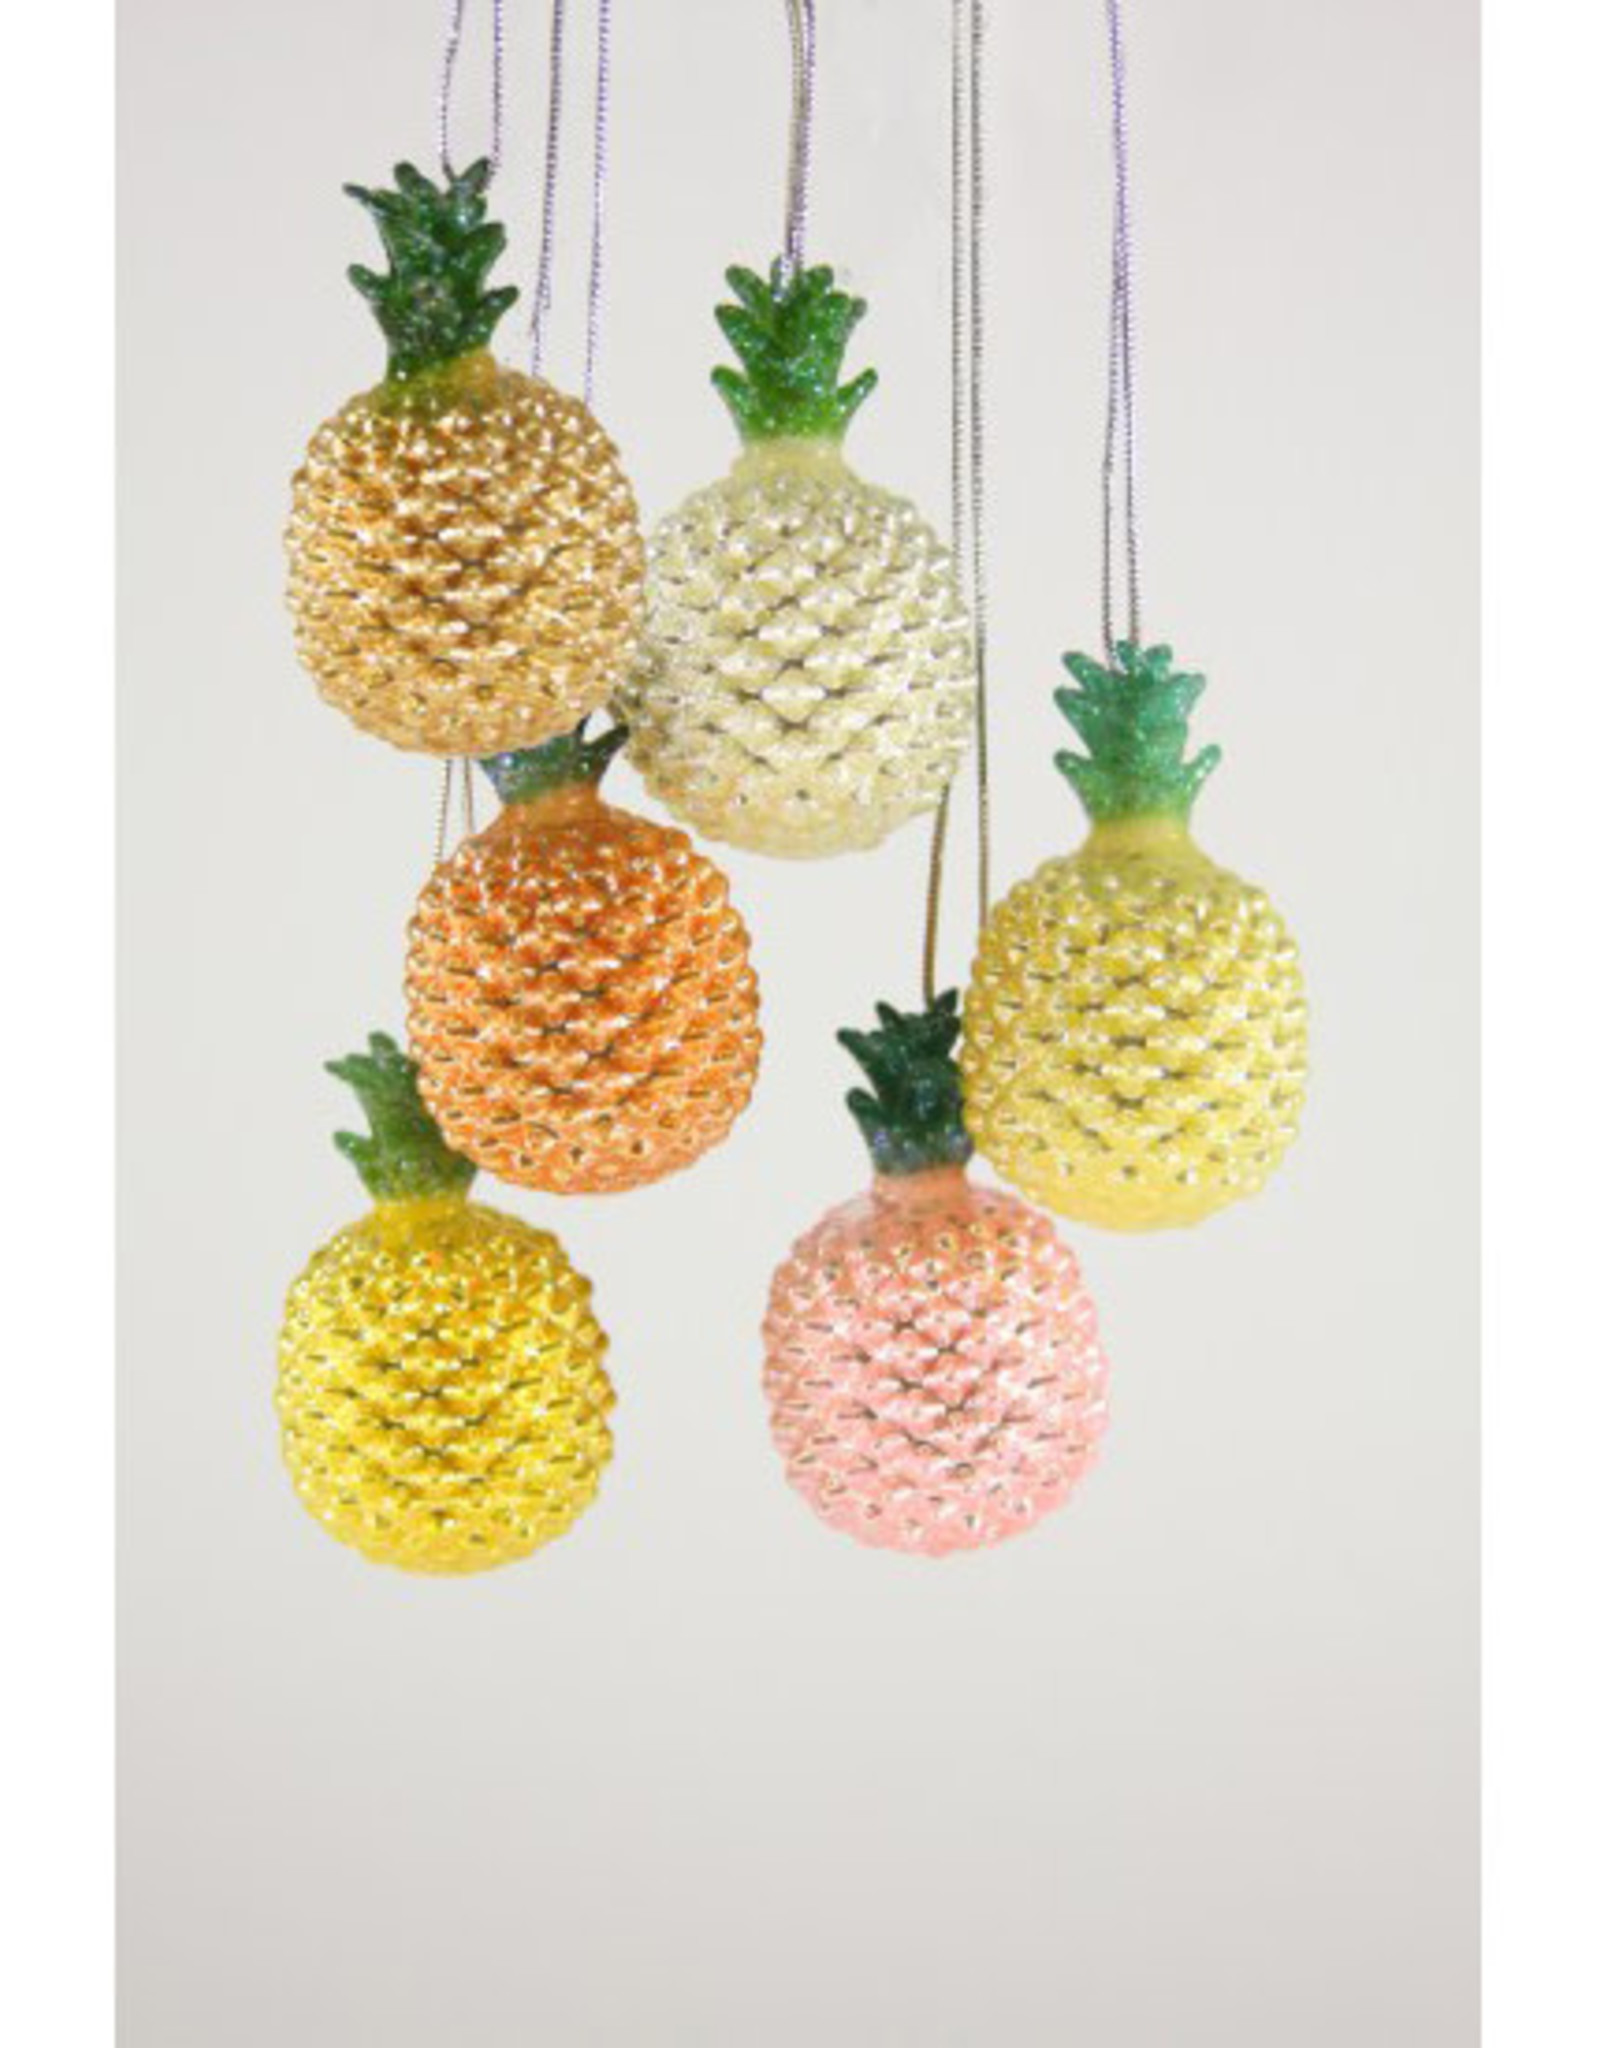 Cody Foster & Co. TINY PINEAPPLE ORNAMENT - 6 STYLES